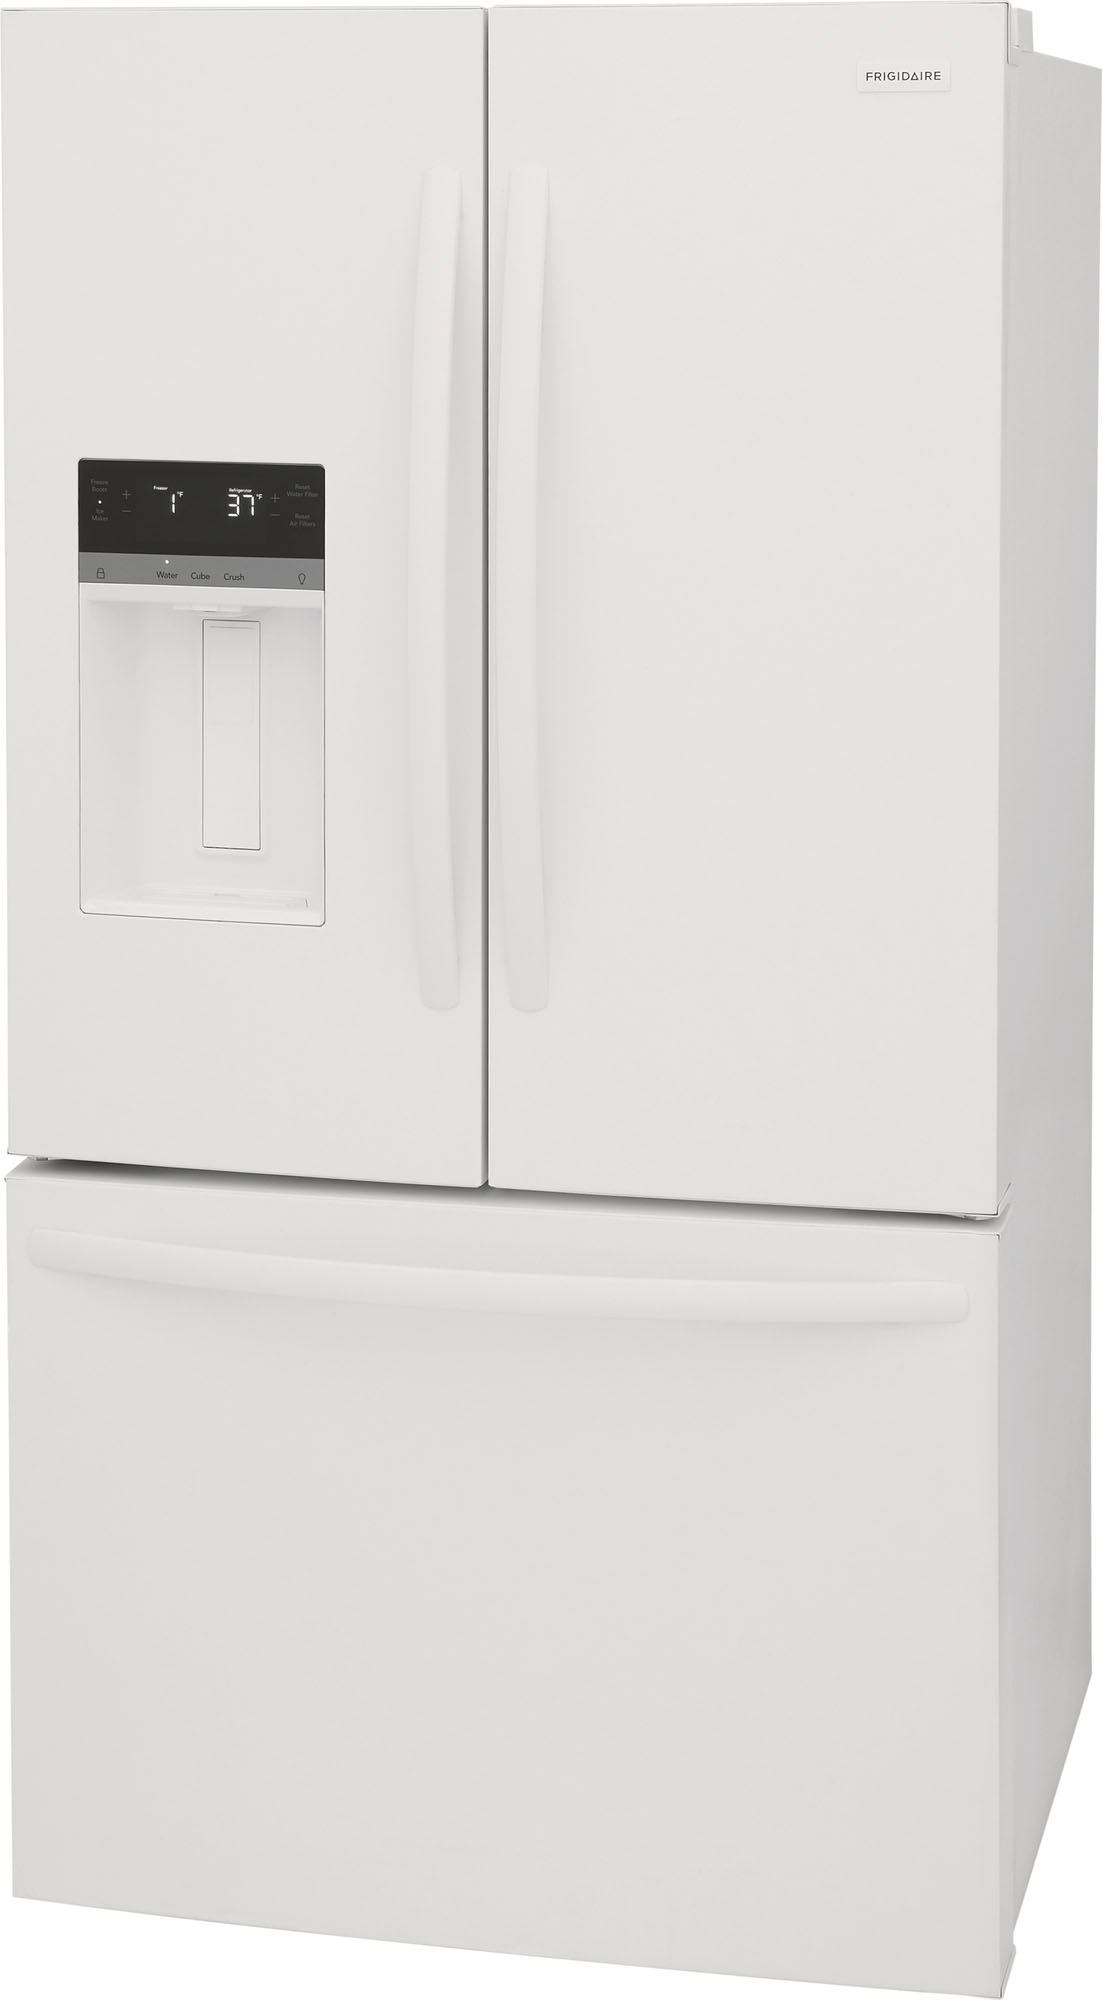 Angle View: Frigidaire - 27.8 Cu. Ft. French Door Refrigerator - White